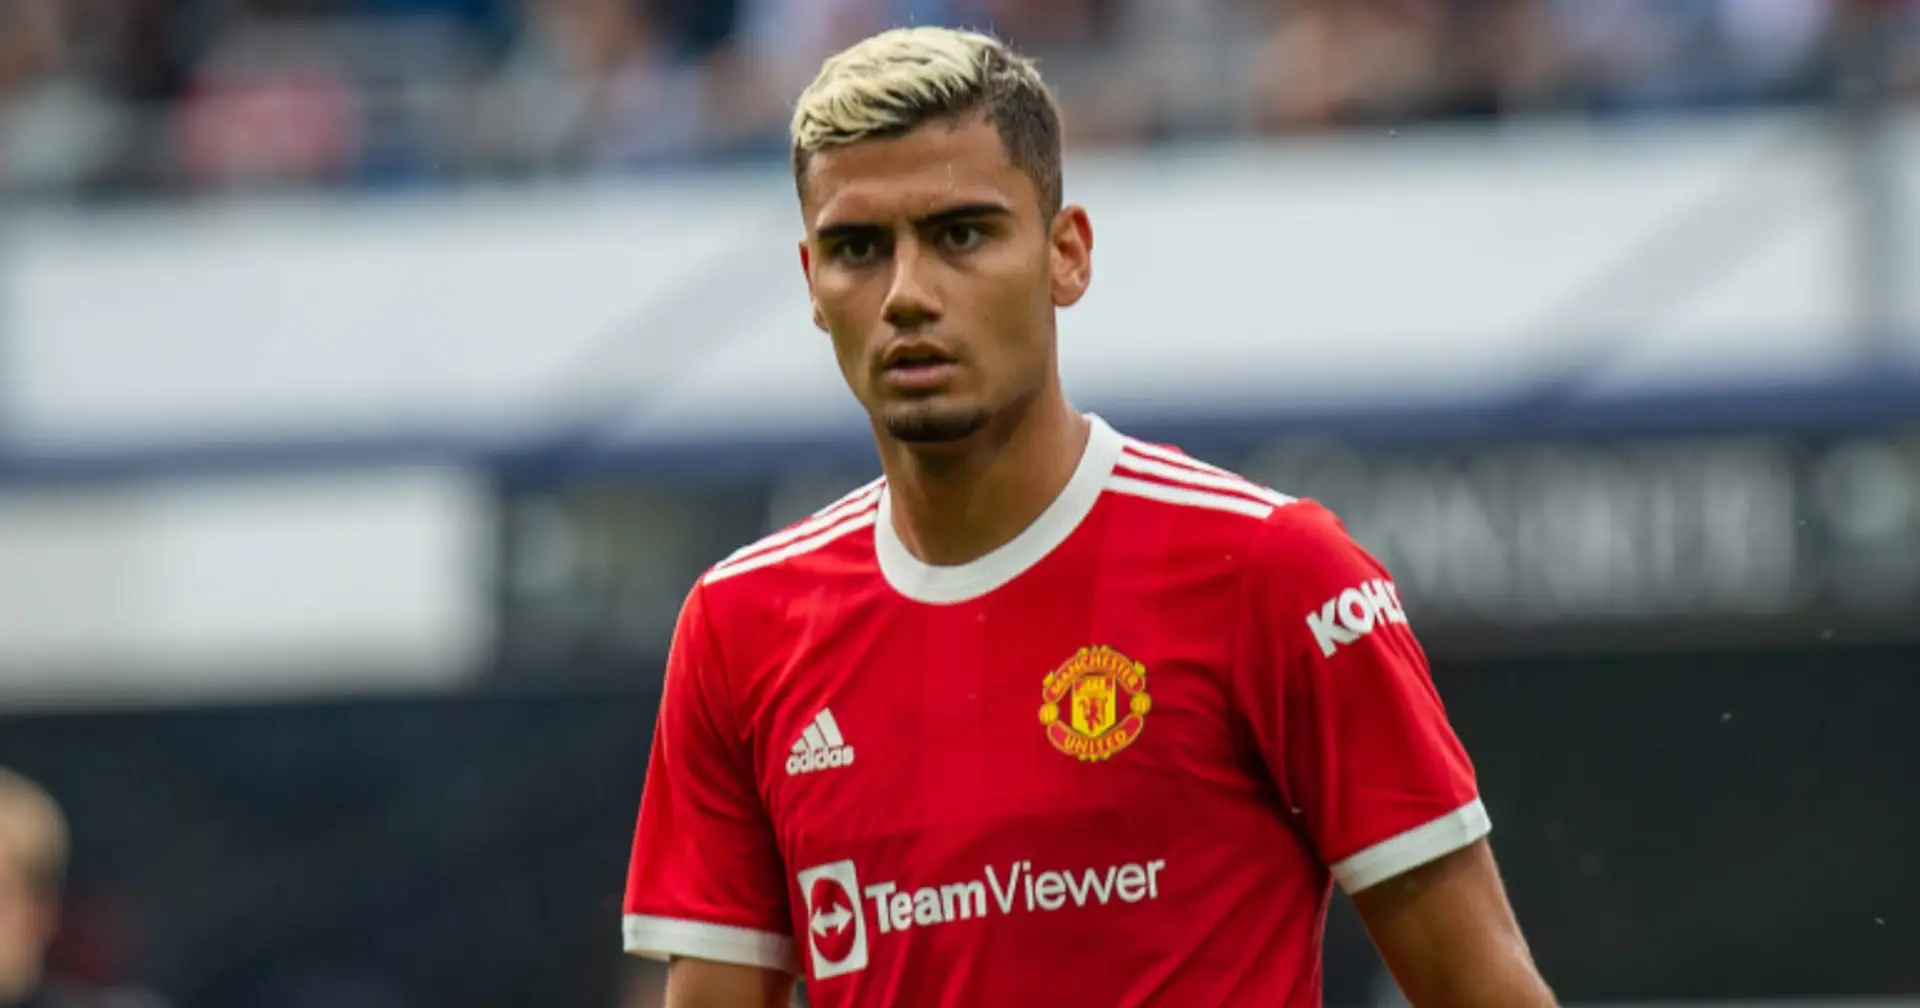 Andreas Pereira 'signs' Fulham contract — details of transfer revealed (reliability: 5 stars)